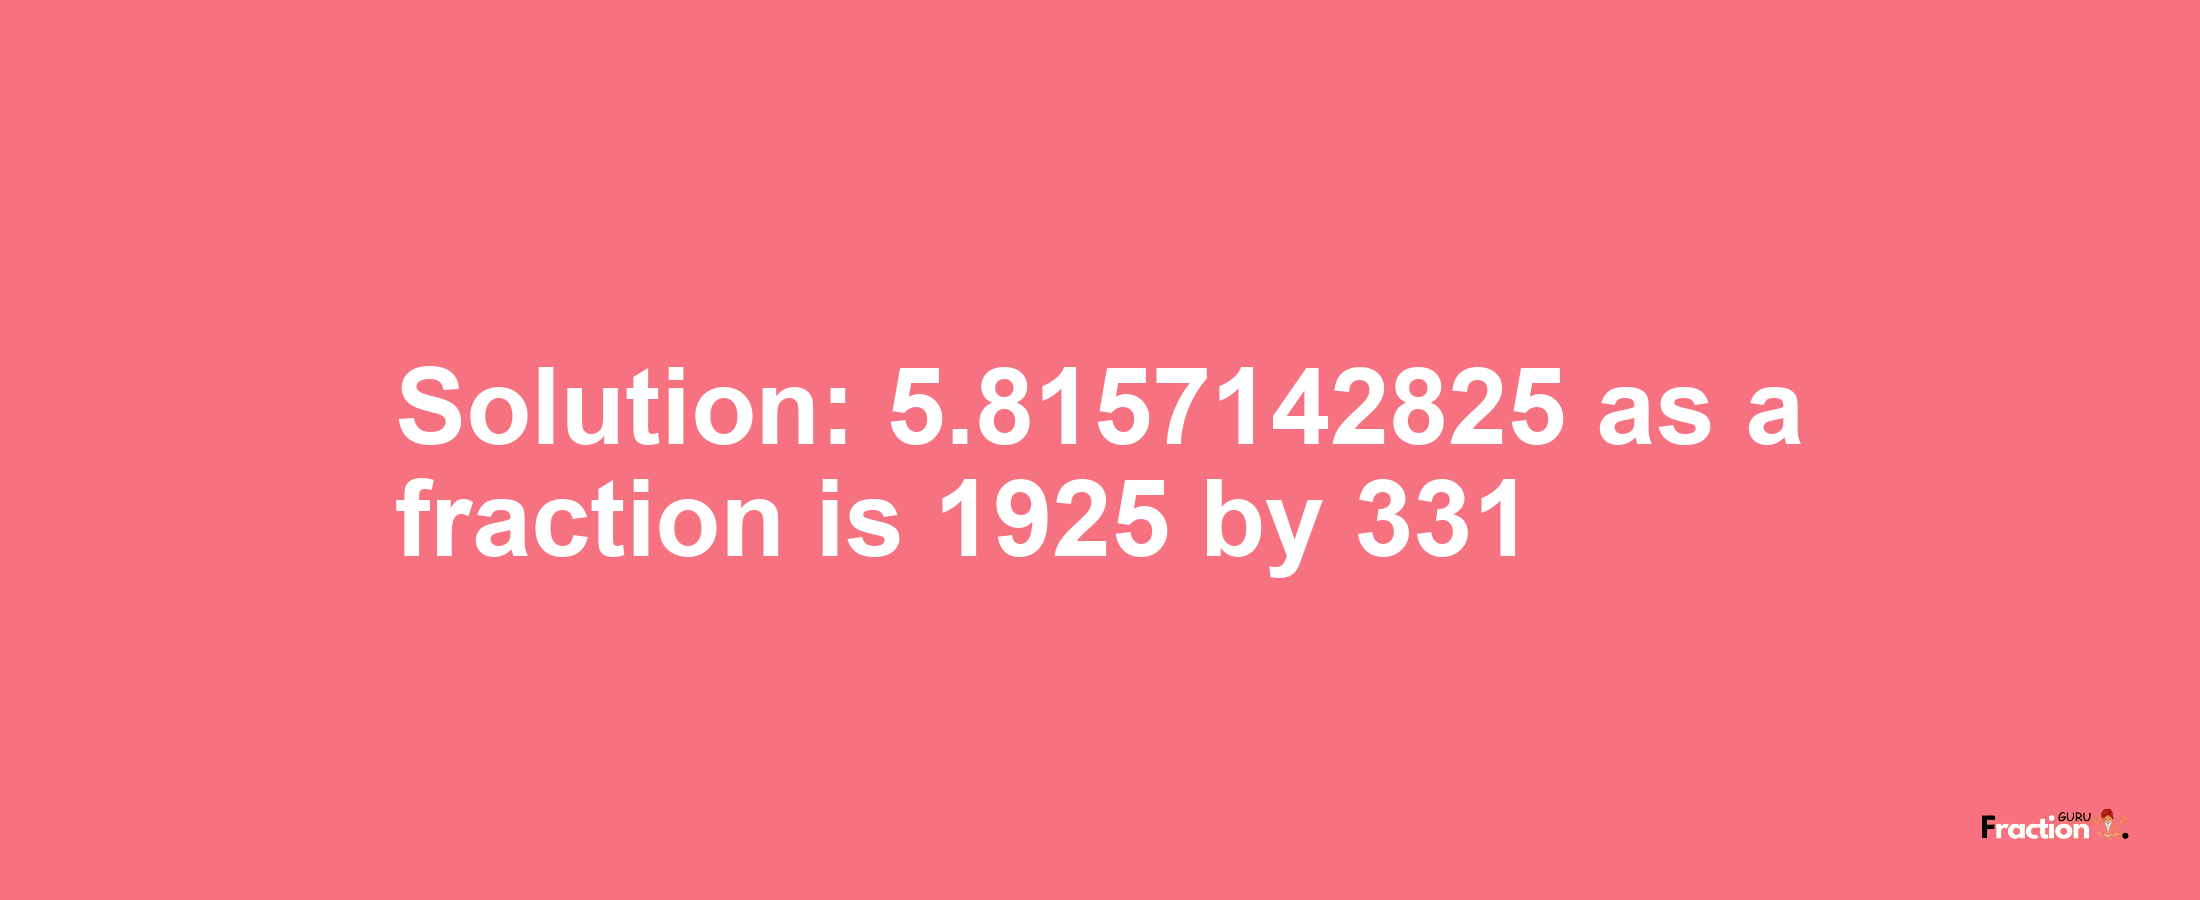 Solution:5.8157142825 as a fraction is 1925/331